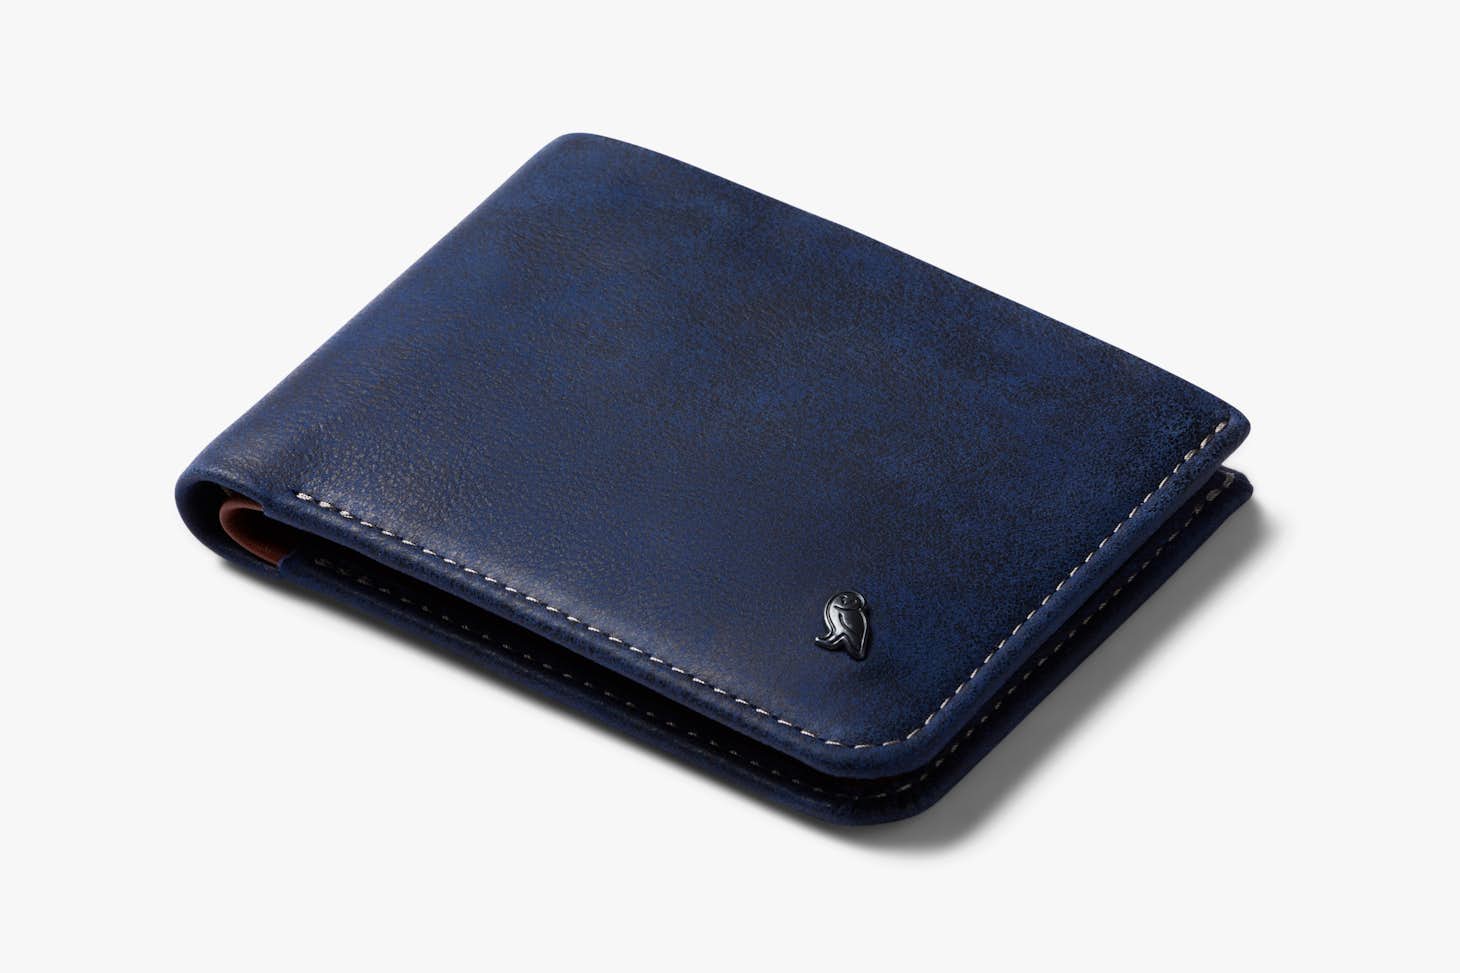 bellroy wallets - a full review